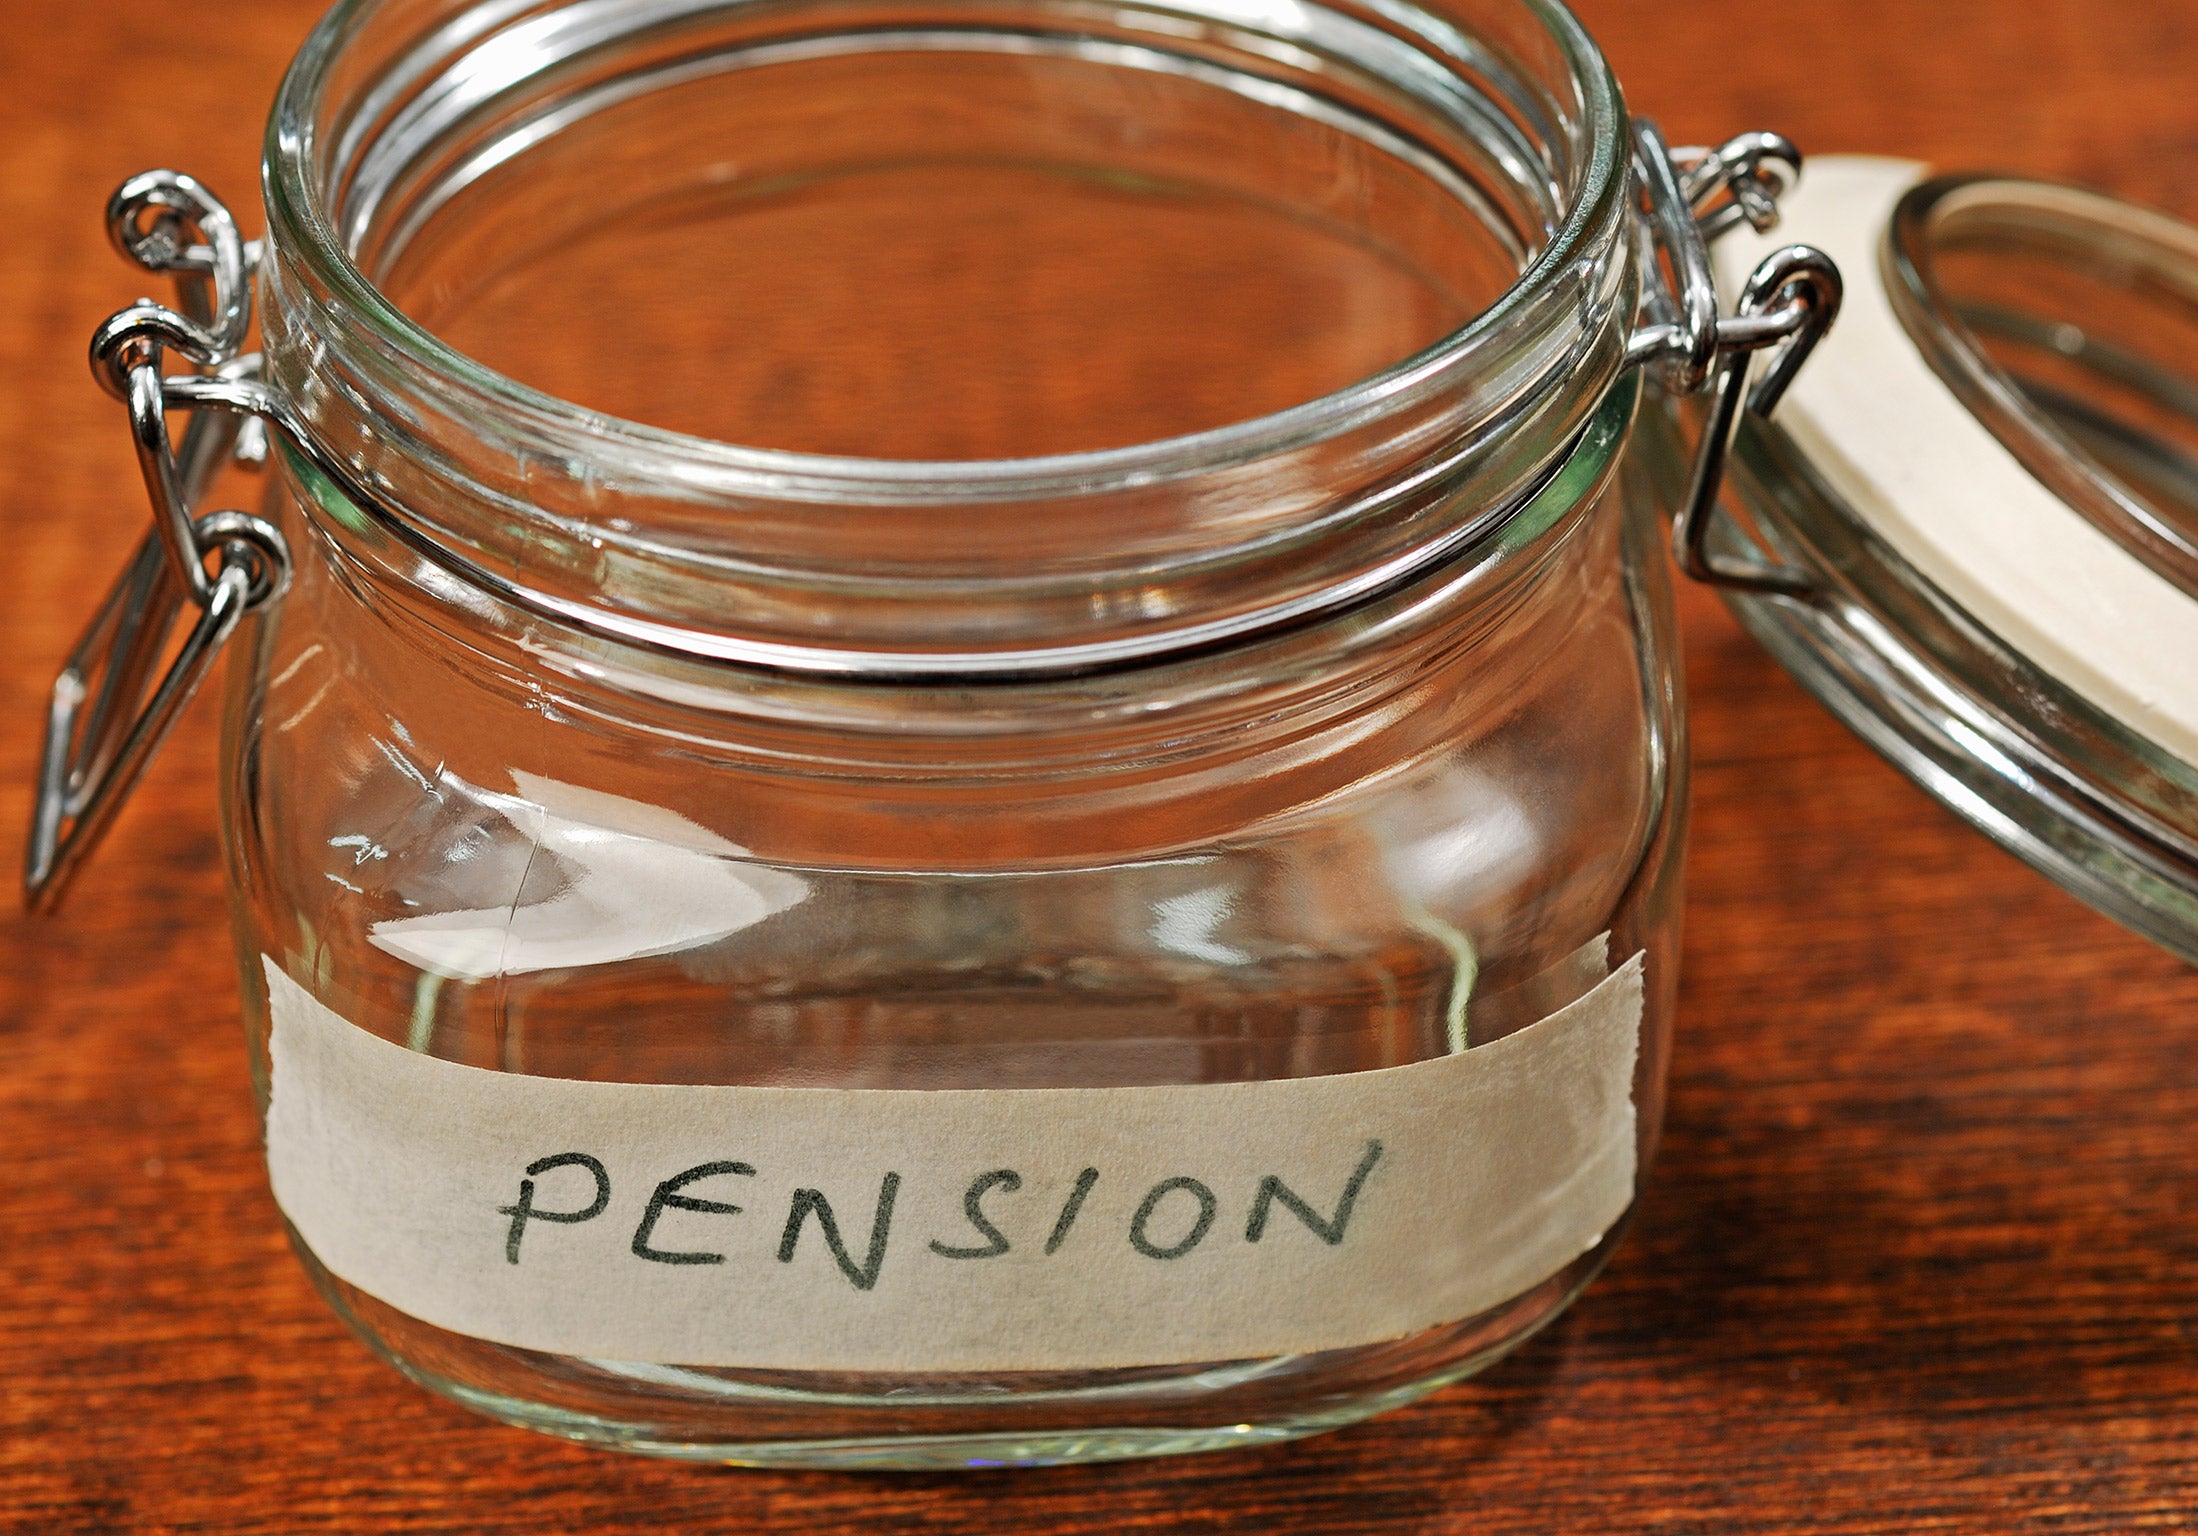 Fewer than a third of those surveyed said they have a pension scheme offered through their employer